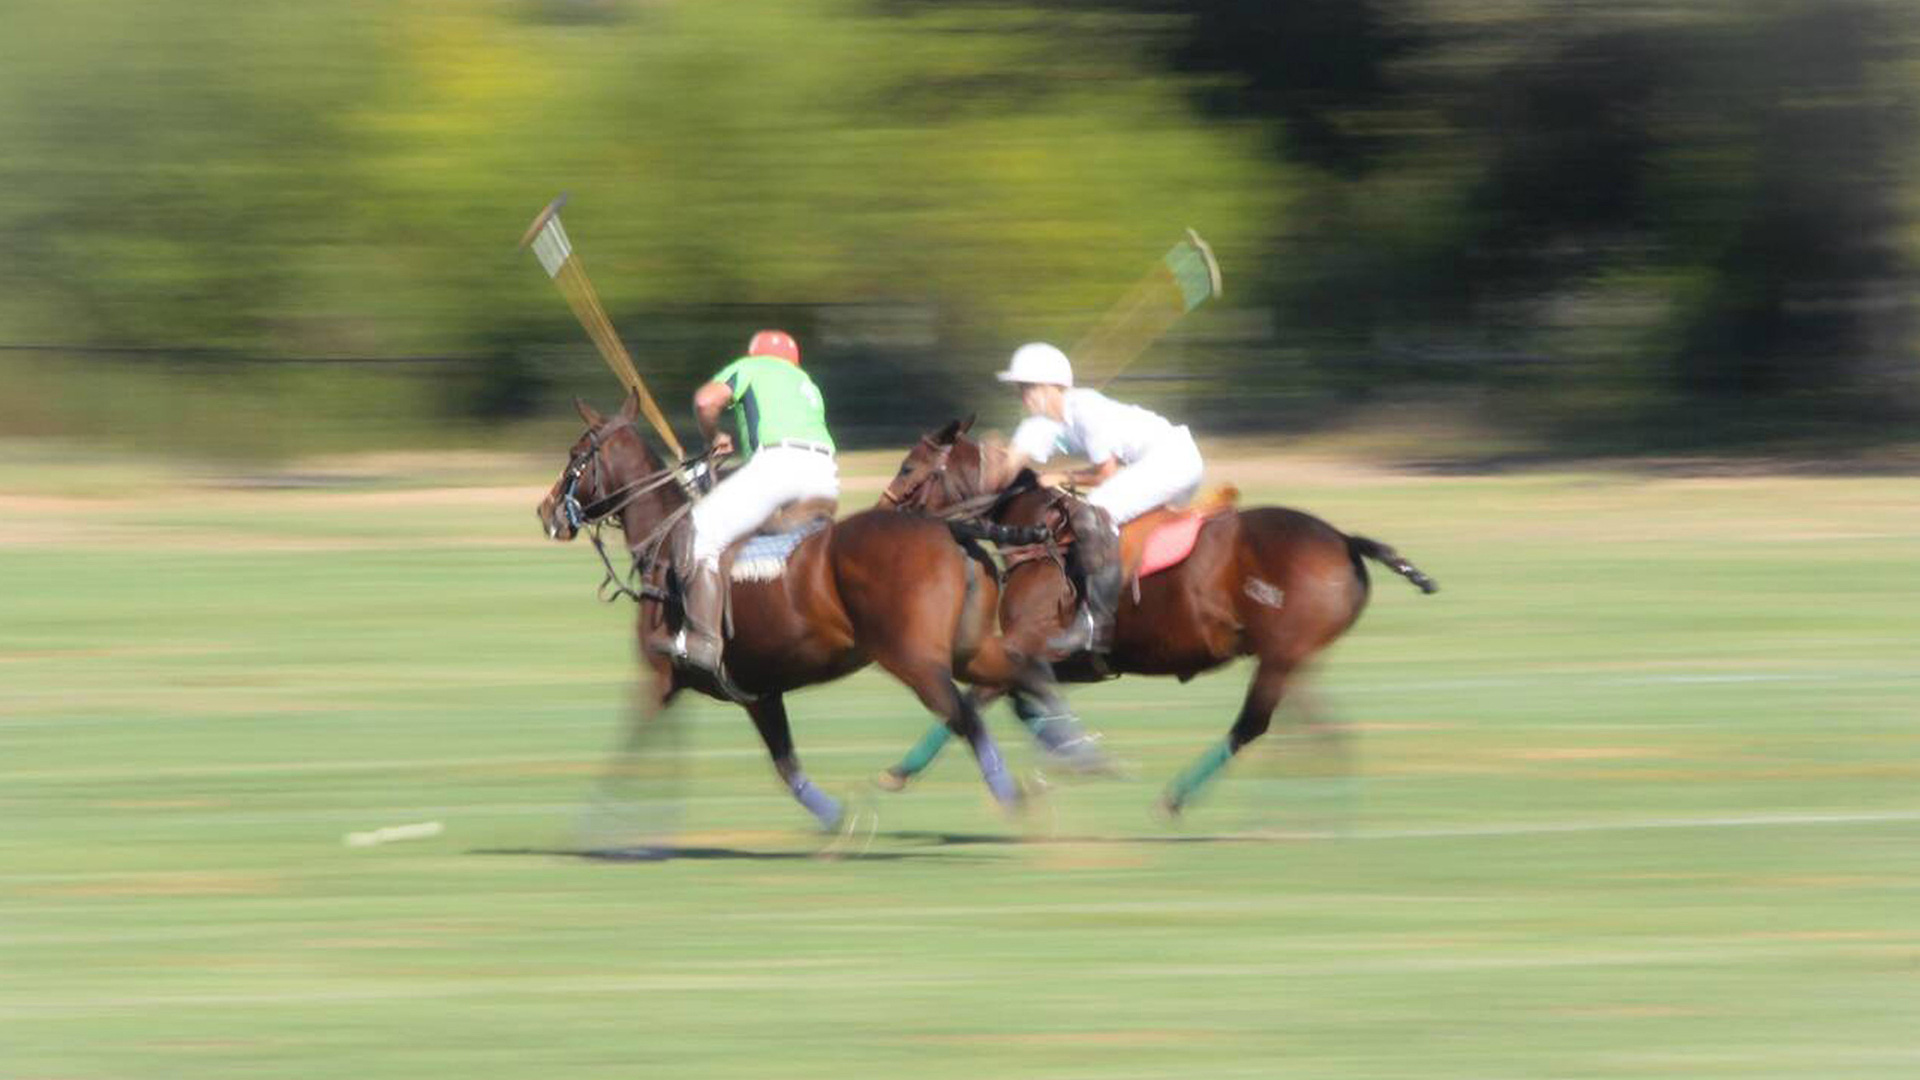 two turner hill polo players by adams design best brochure designer